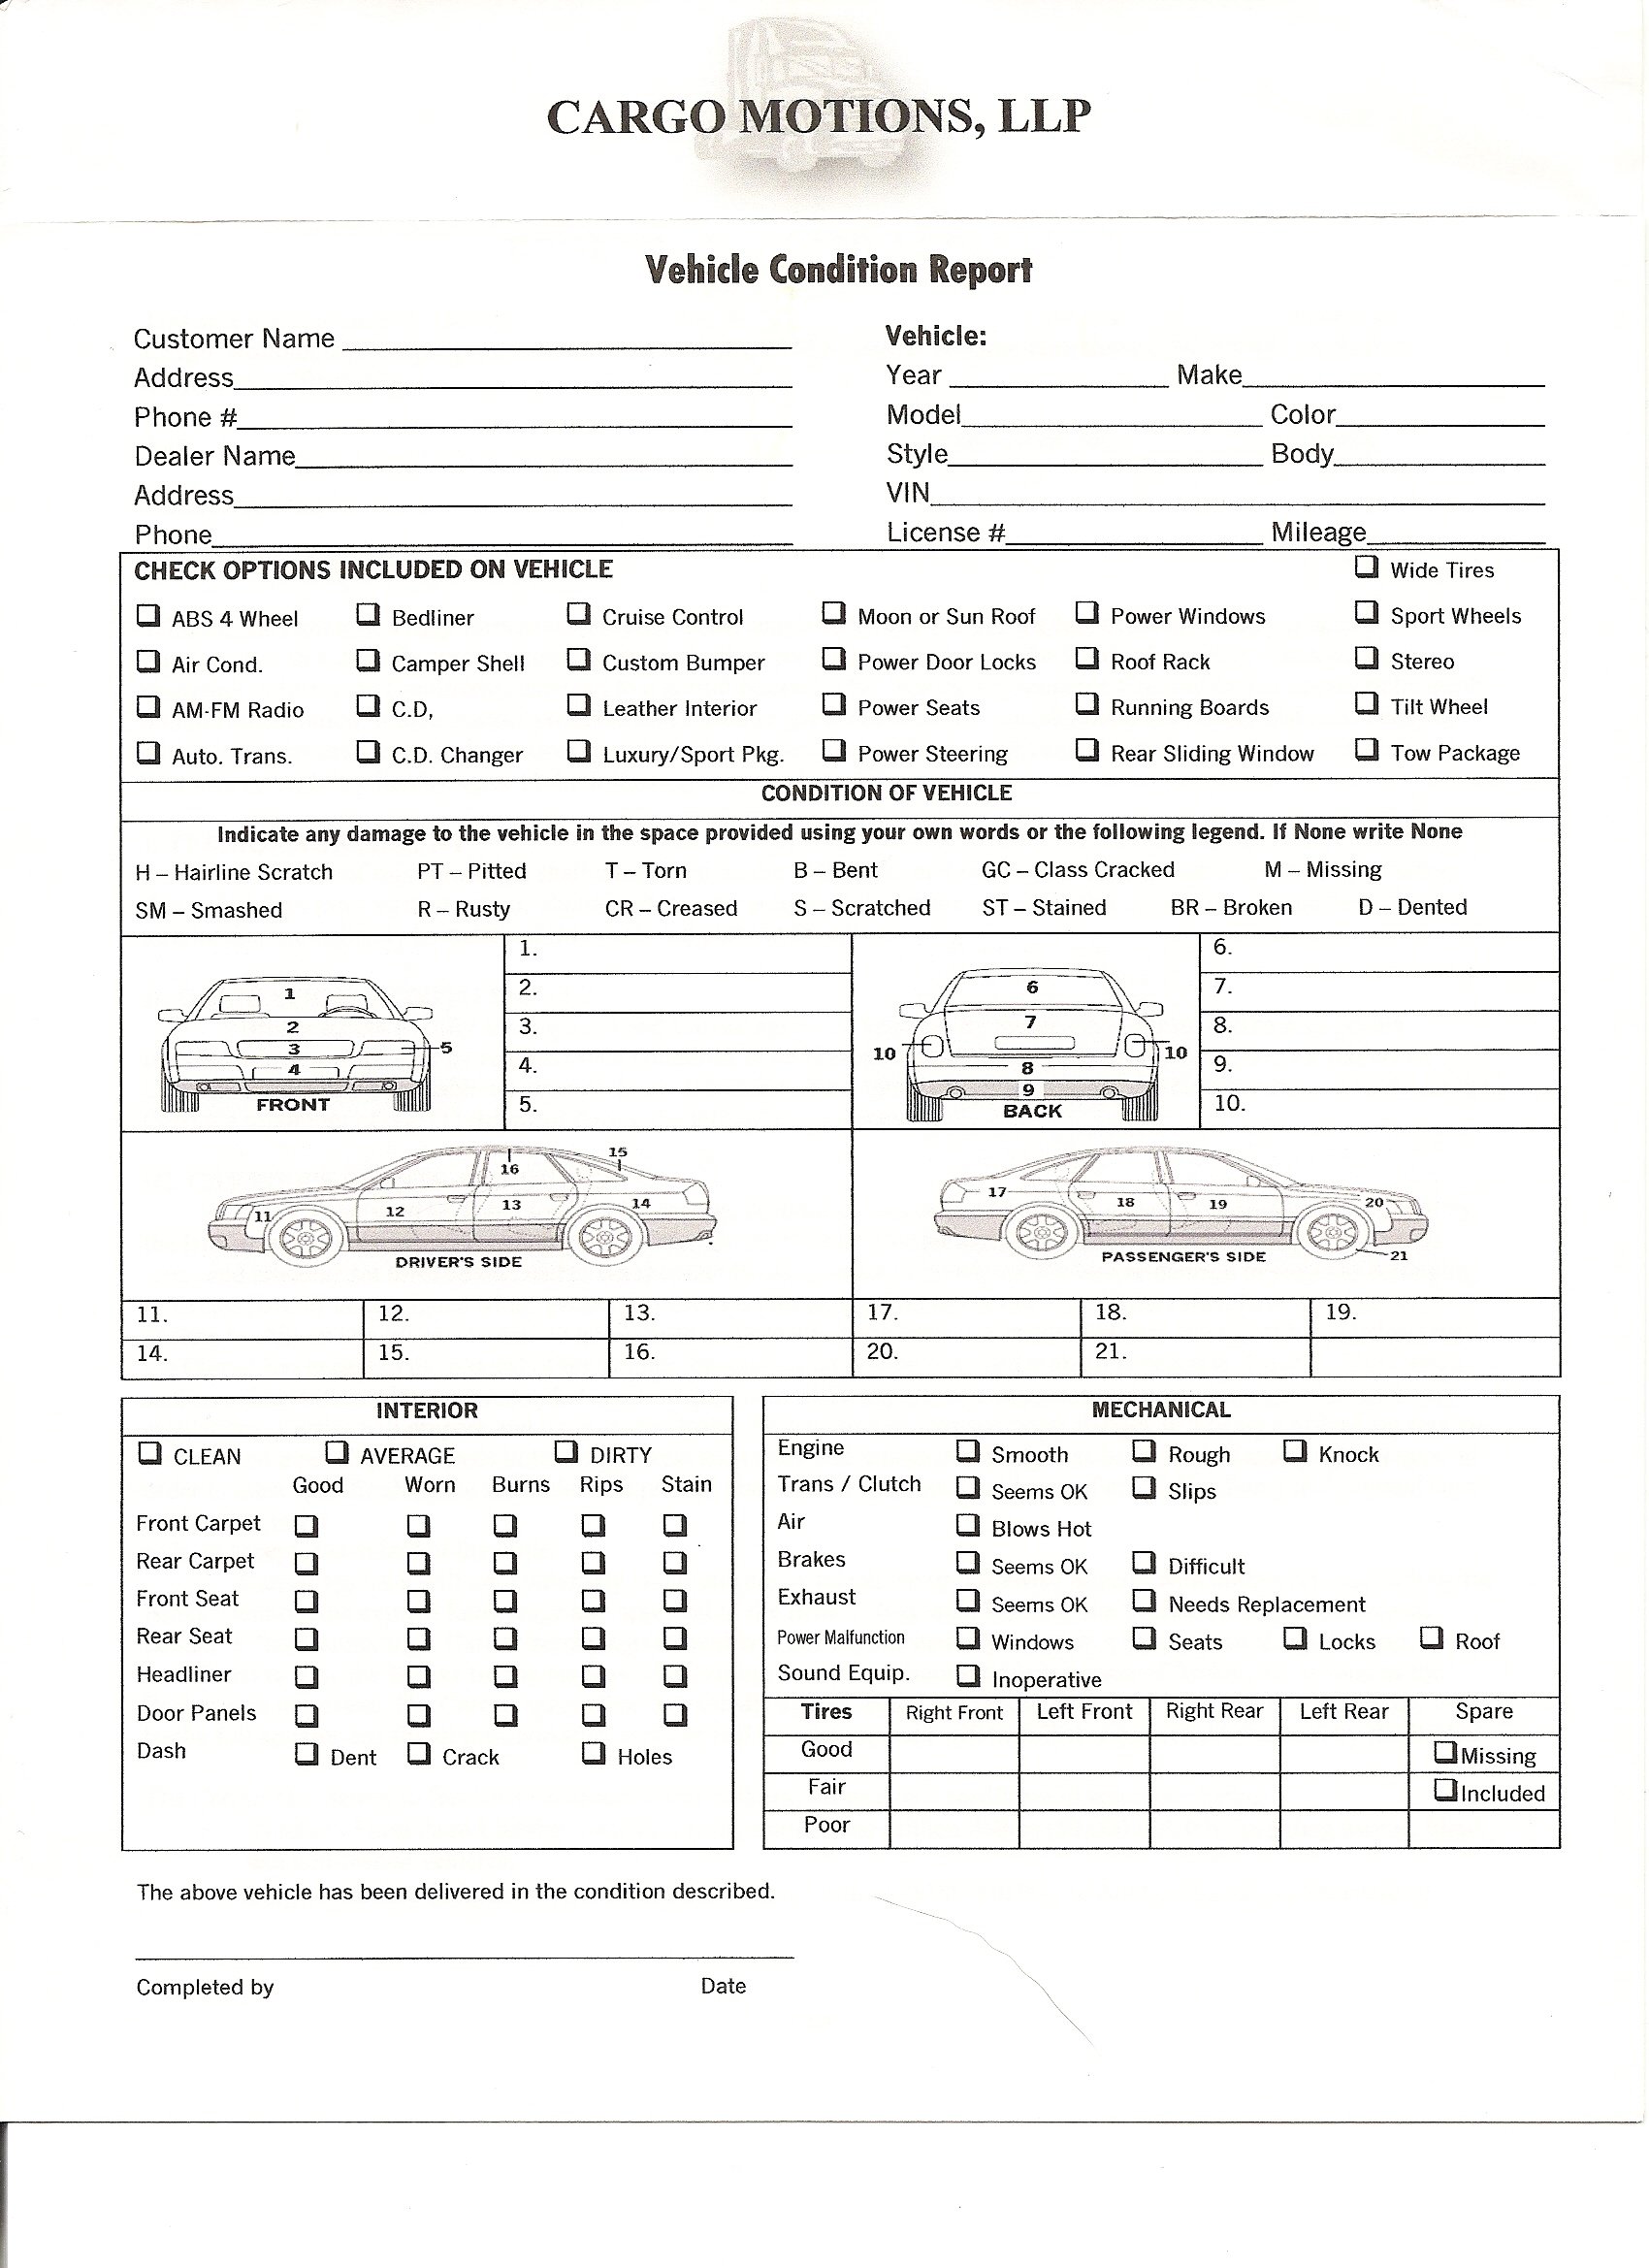 Vehicle Condition Report